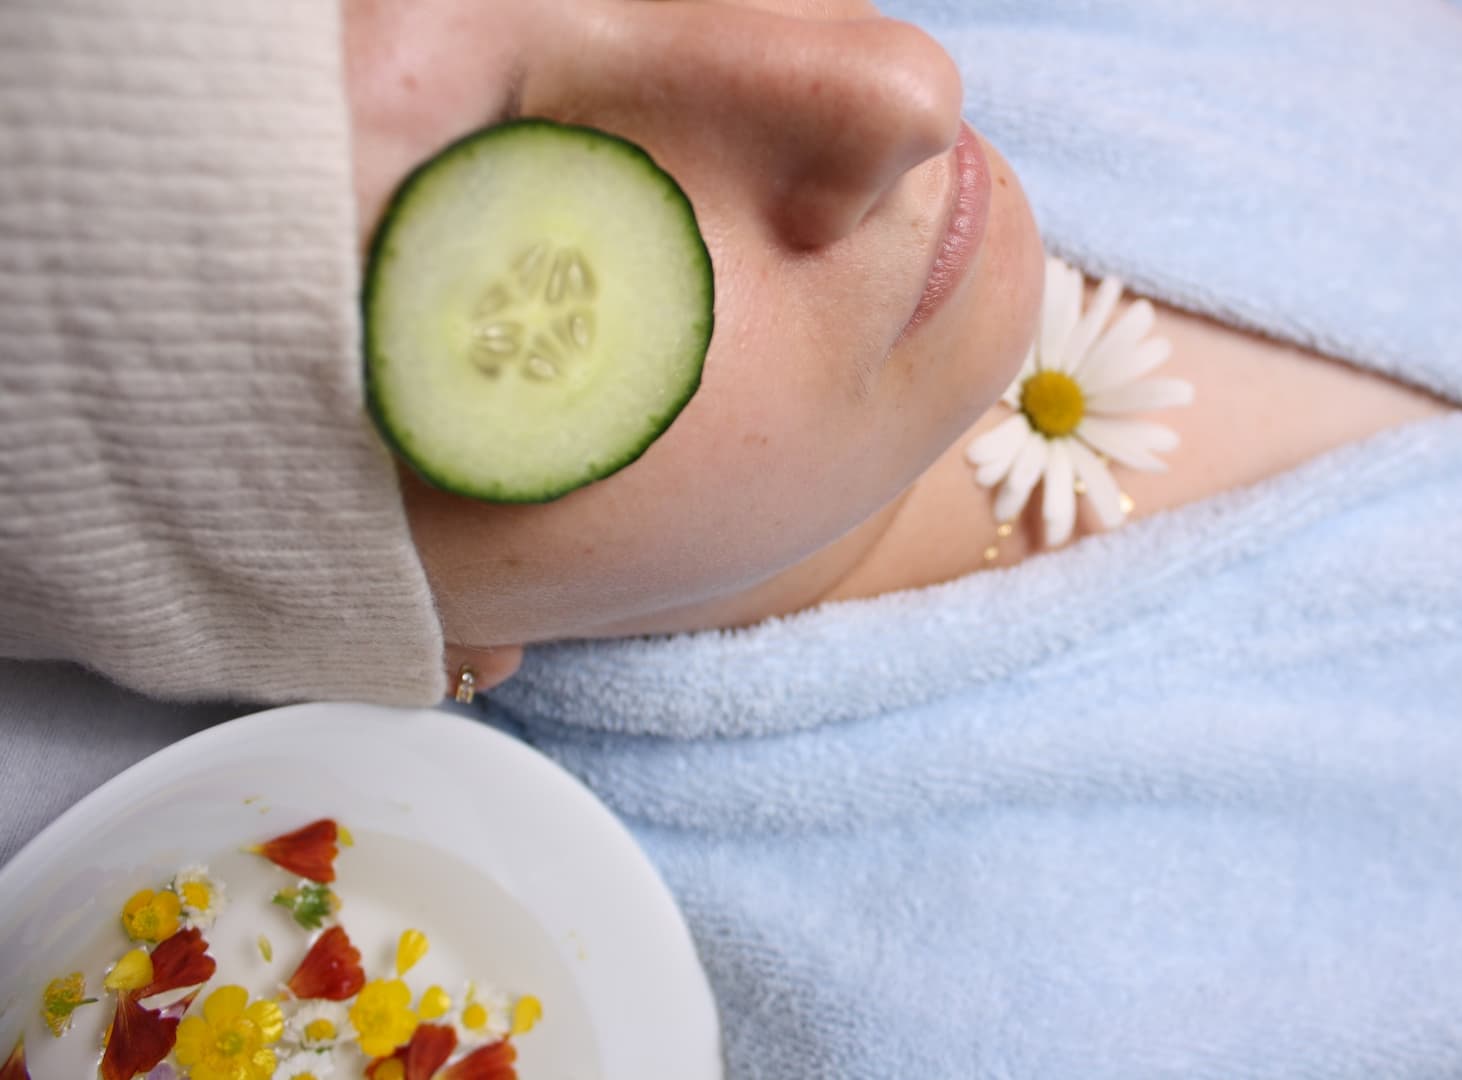 What are natural beauty therapies?